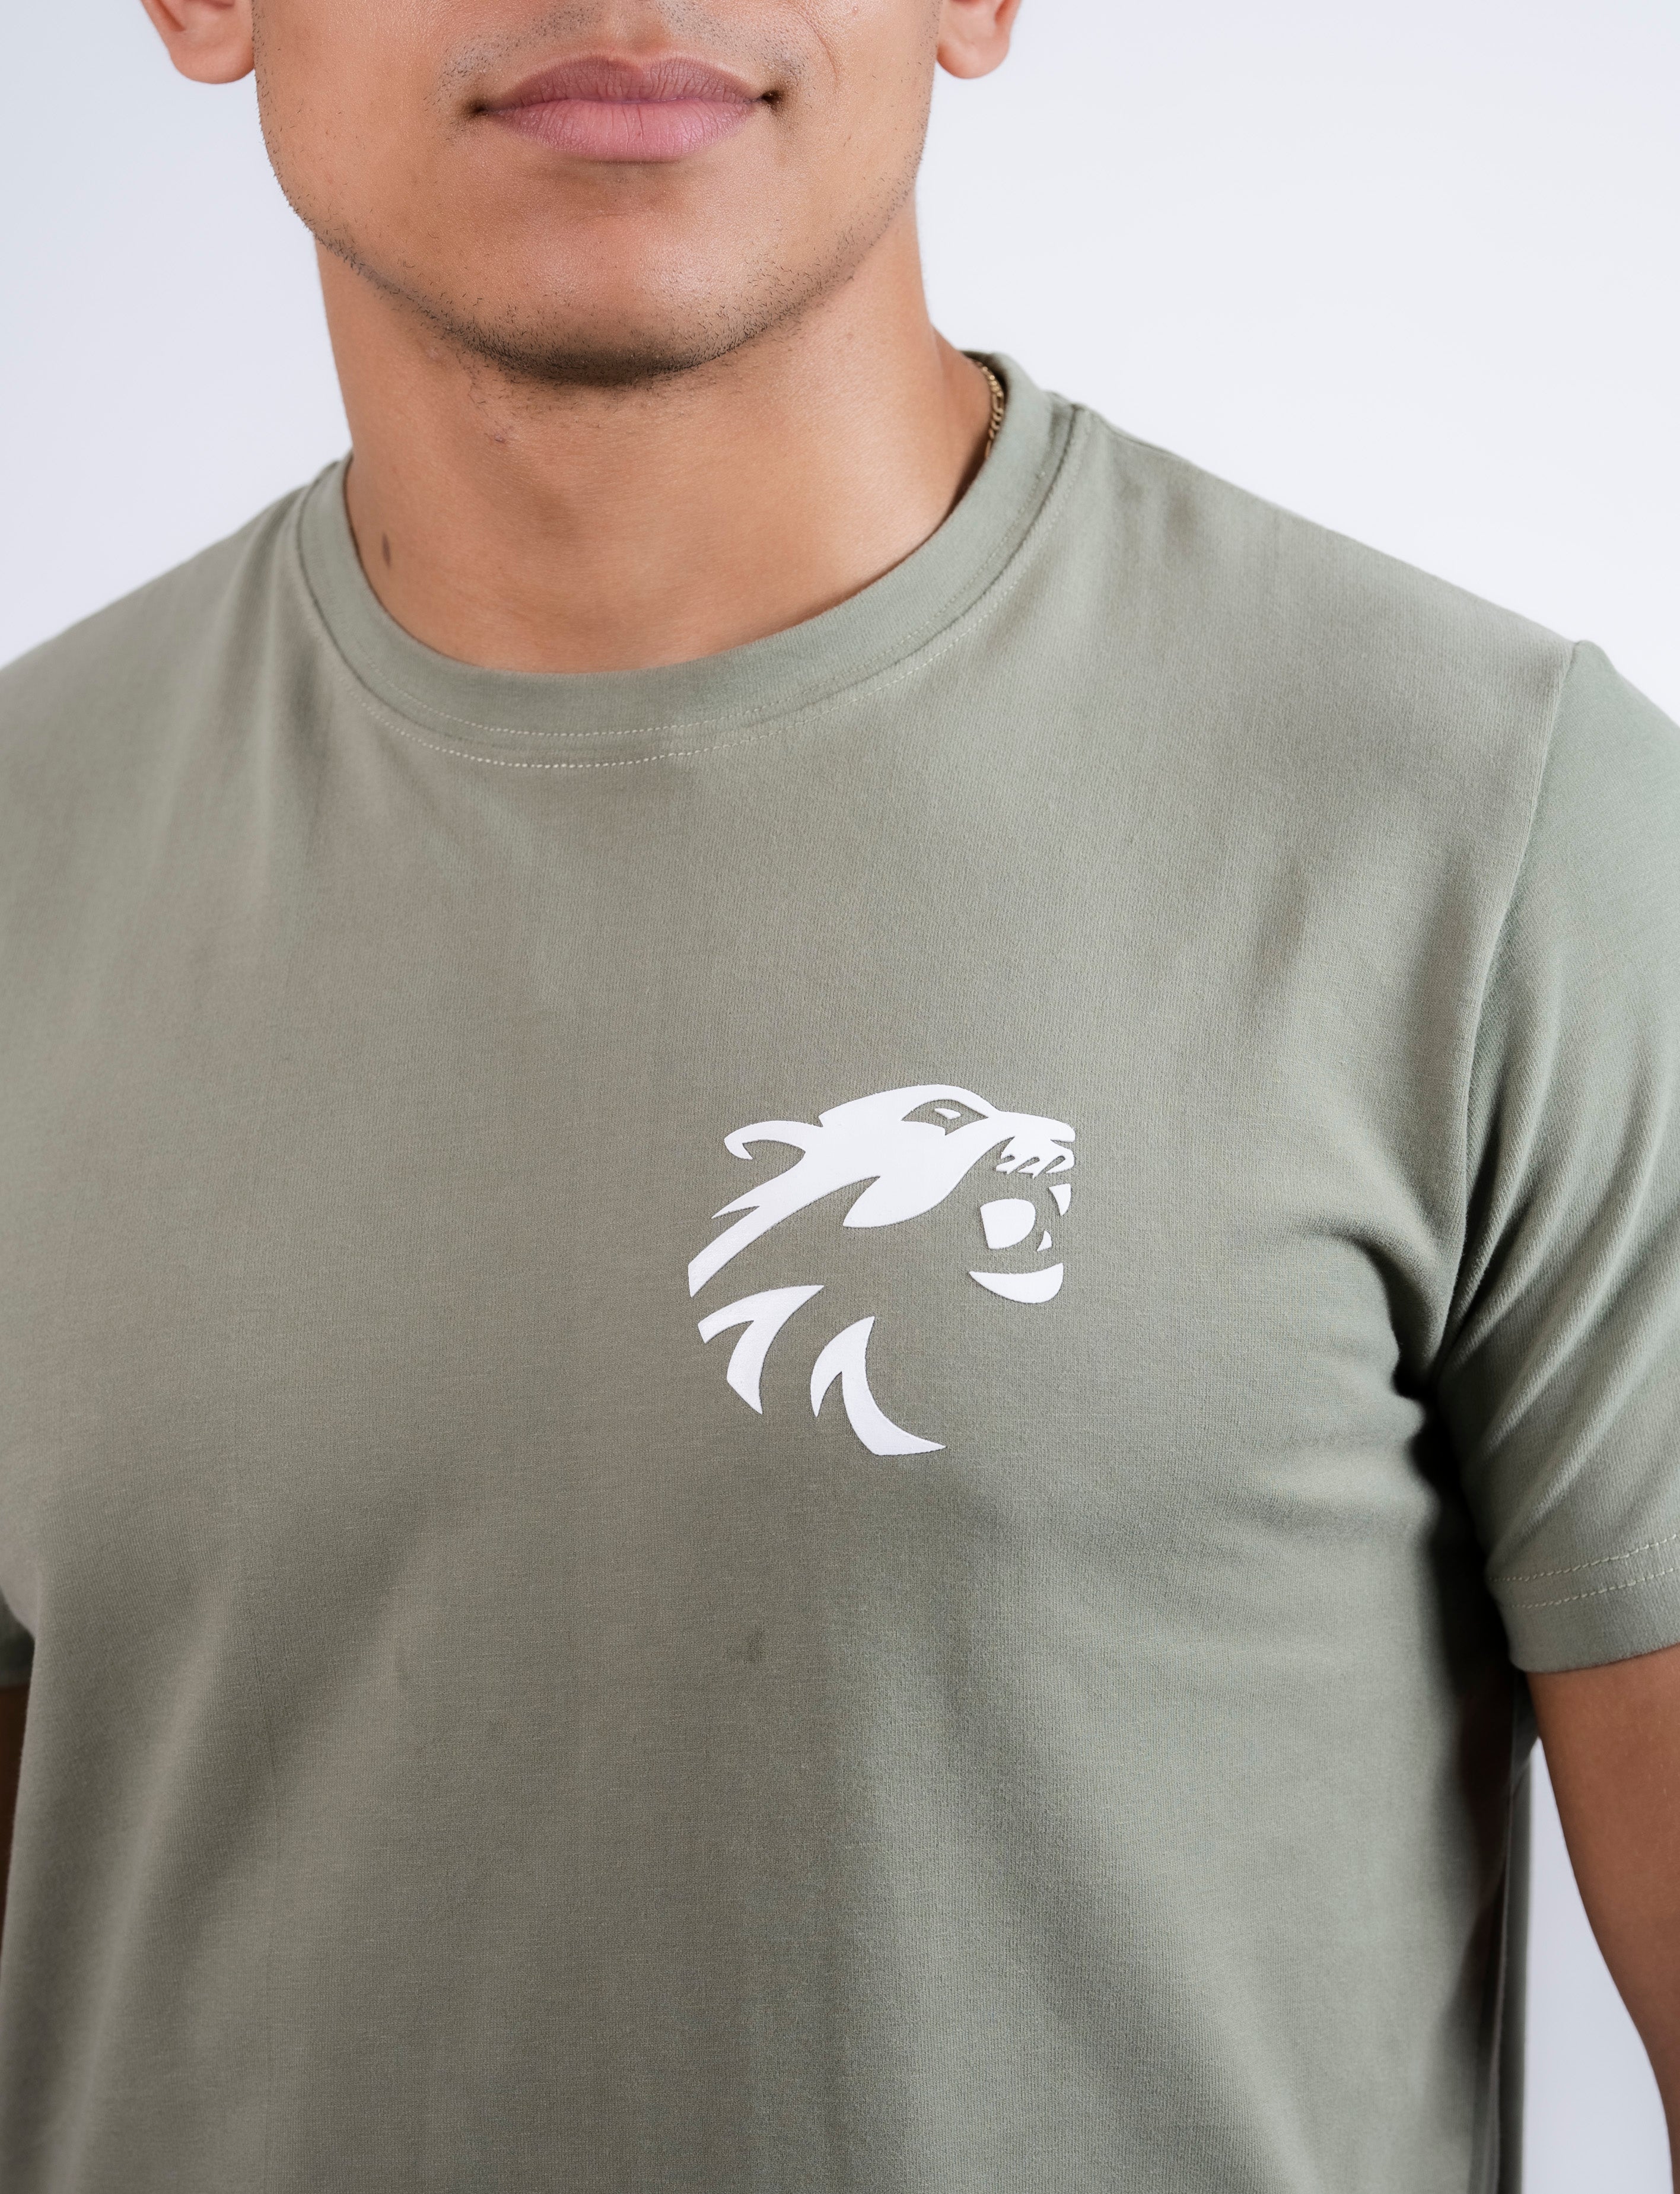 Authentic Army Green Lifestyle T-Shirt